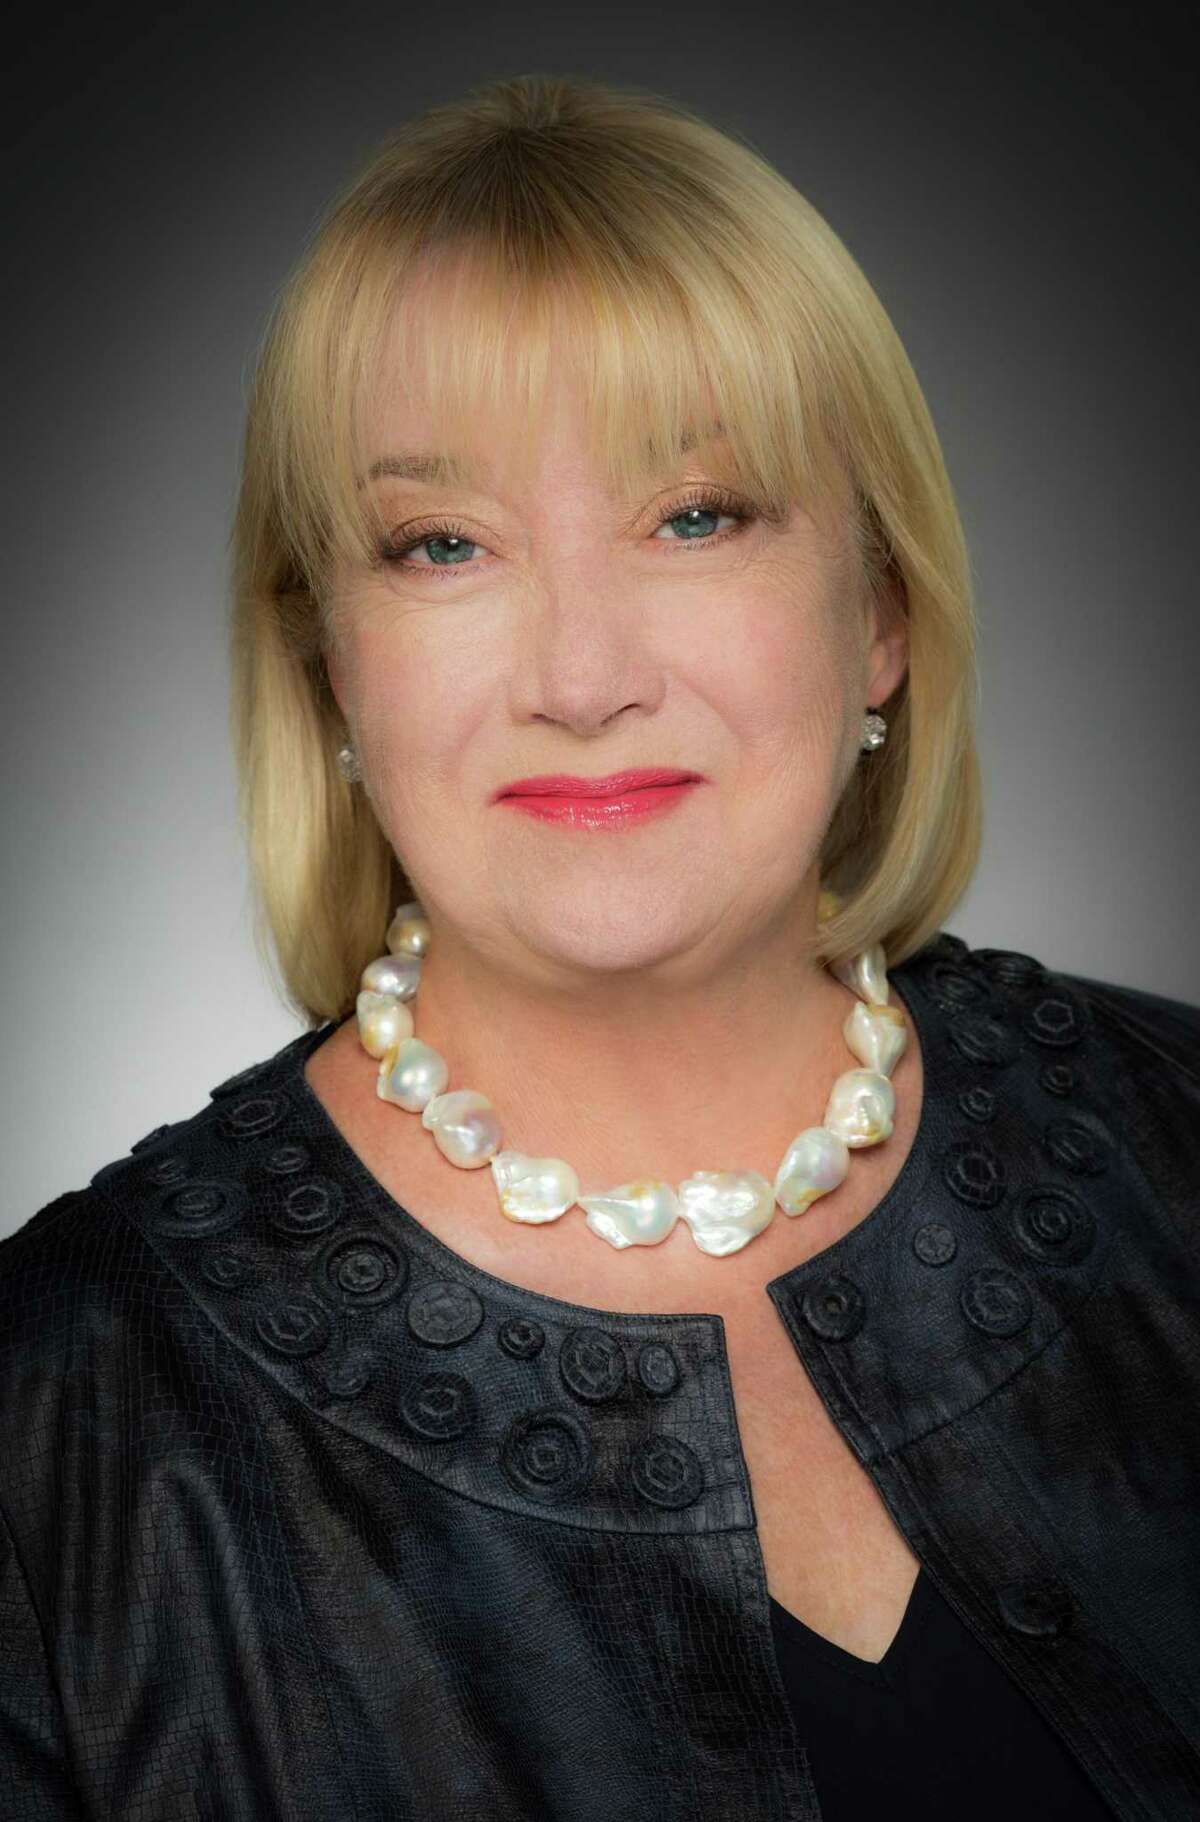 South Texas Money Management founder and Chairman Jeanie Wyatt died from a rare form of cancer Tuesday. She was 65.